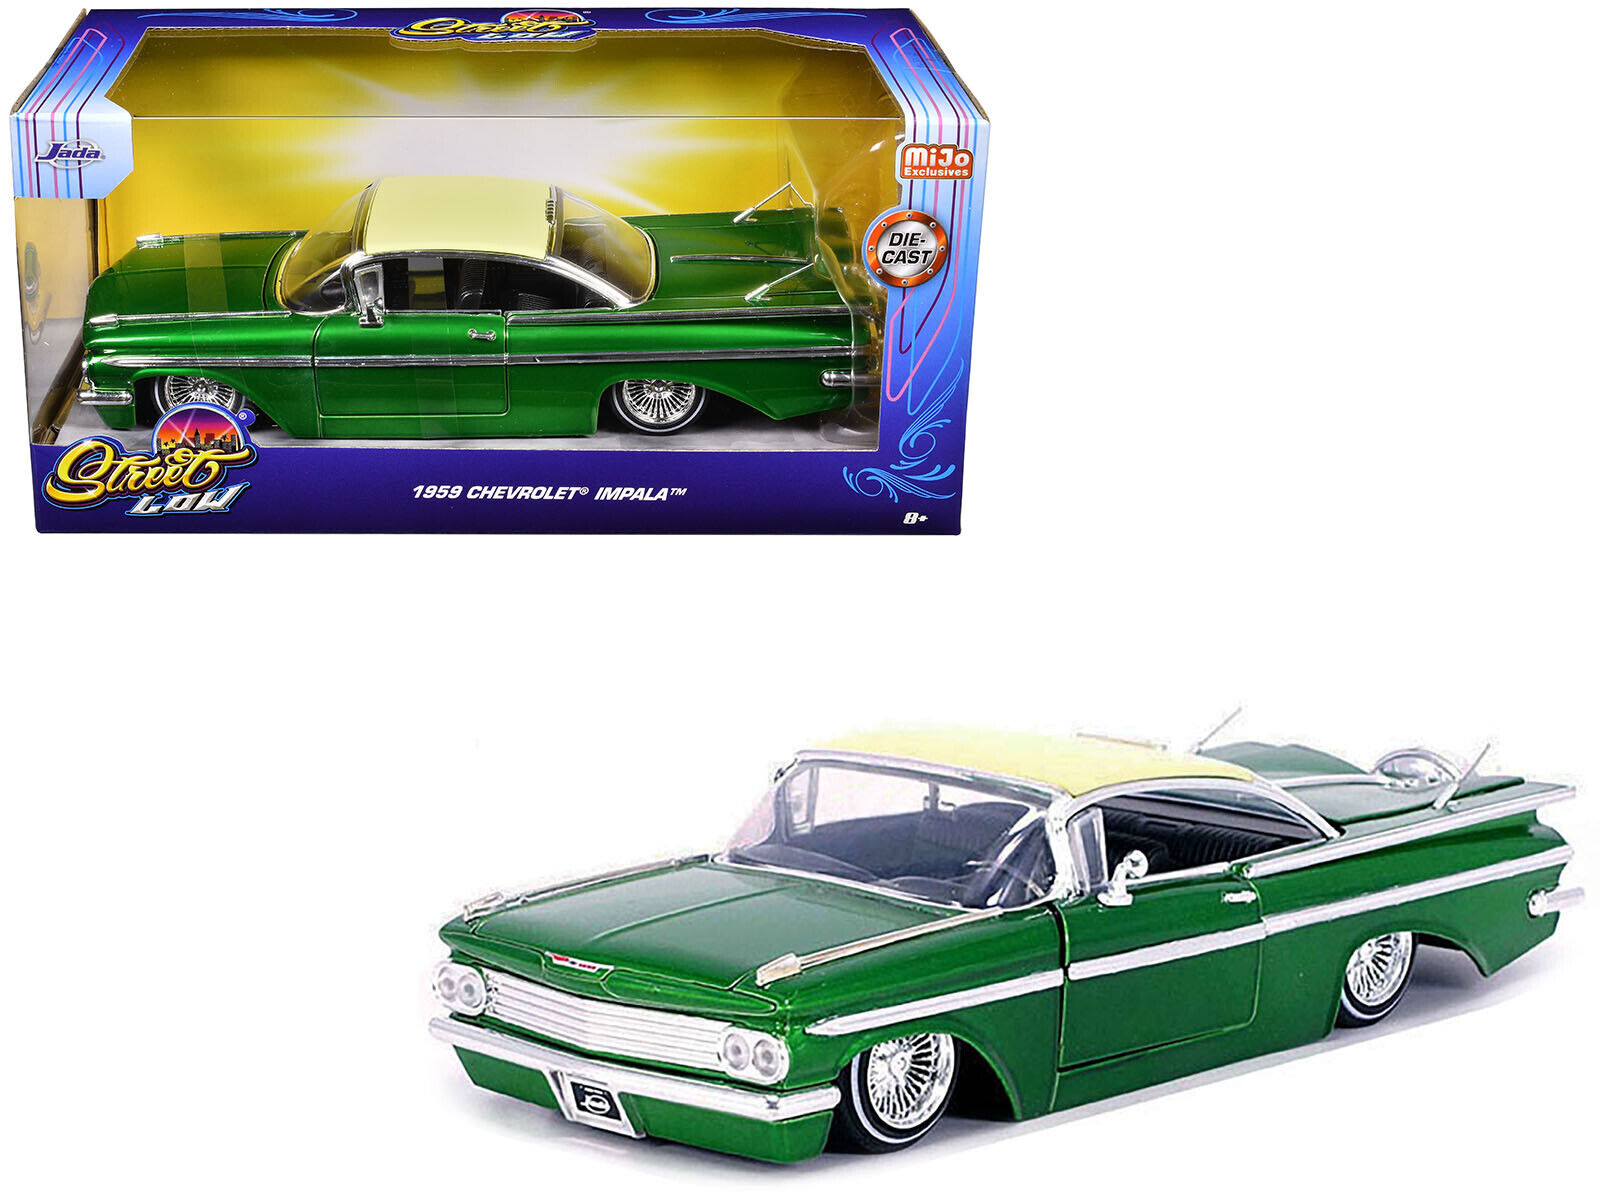 1959 Chevrolet Impala Lowrider Green Metallic with Cream Top and Wire Wheels